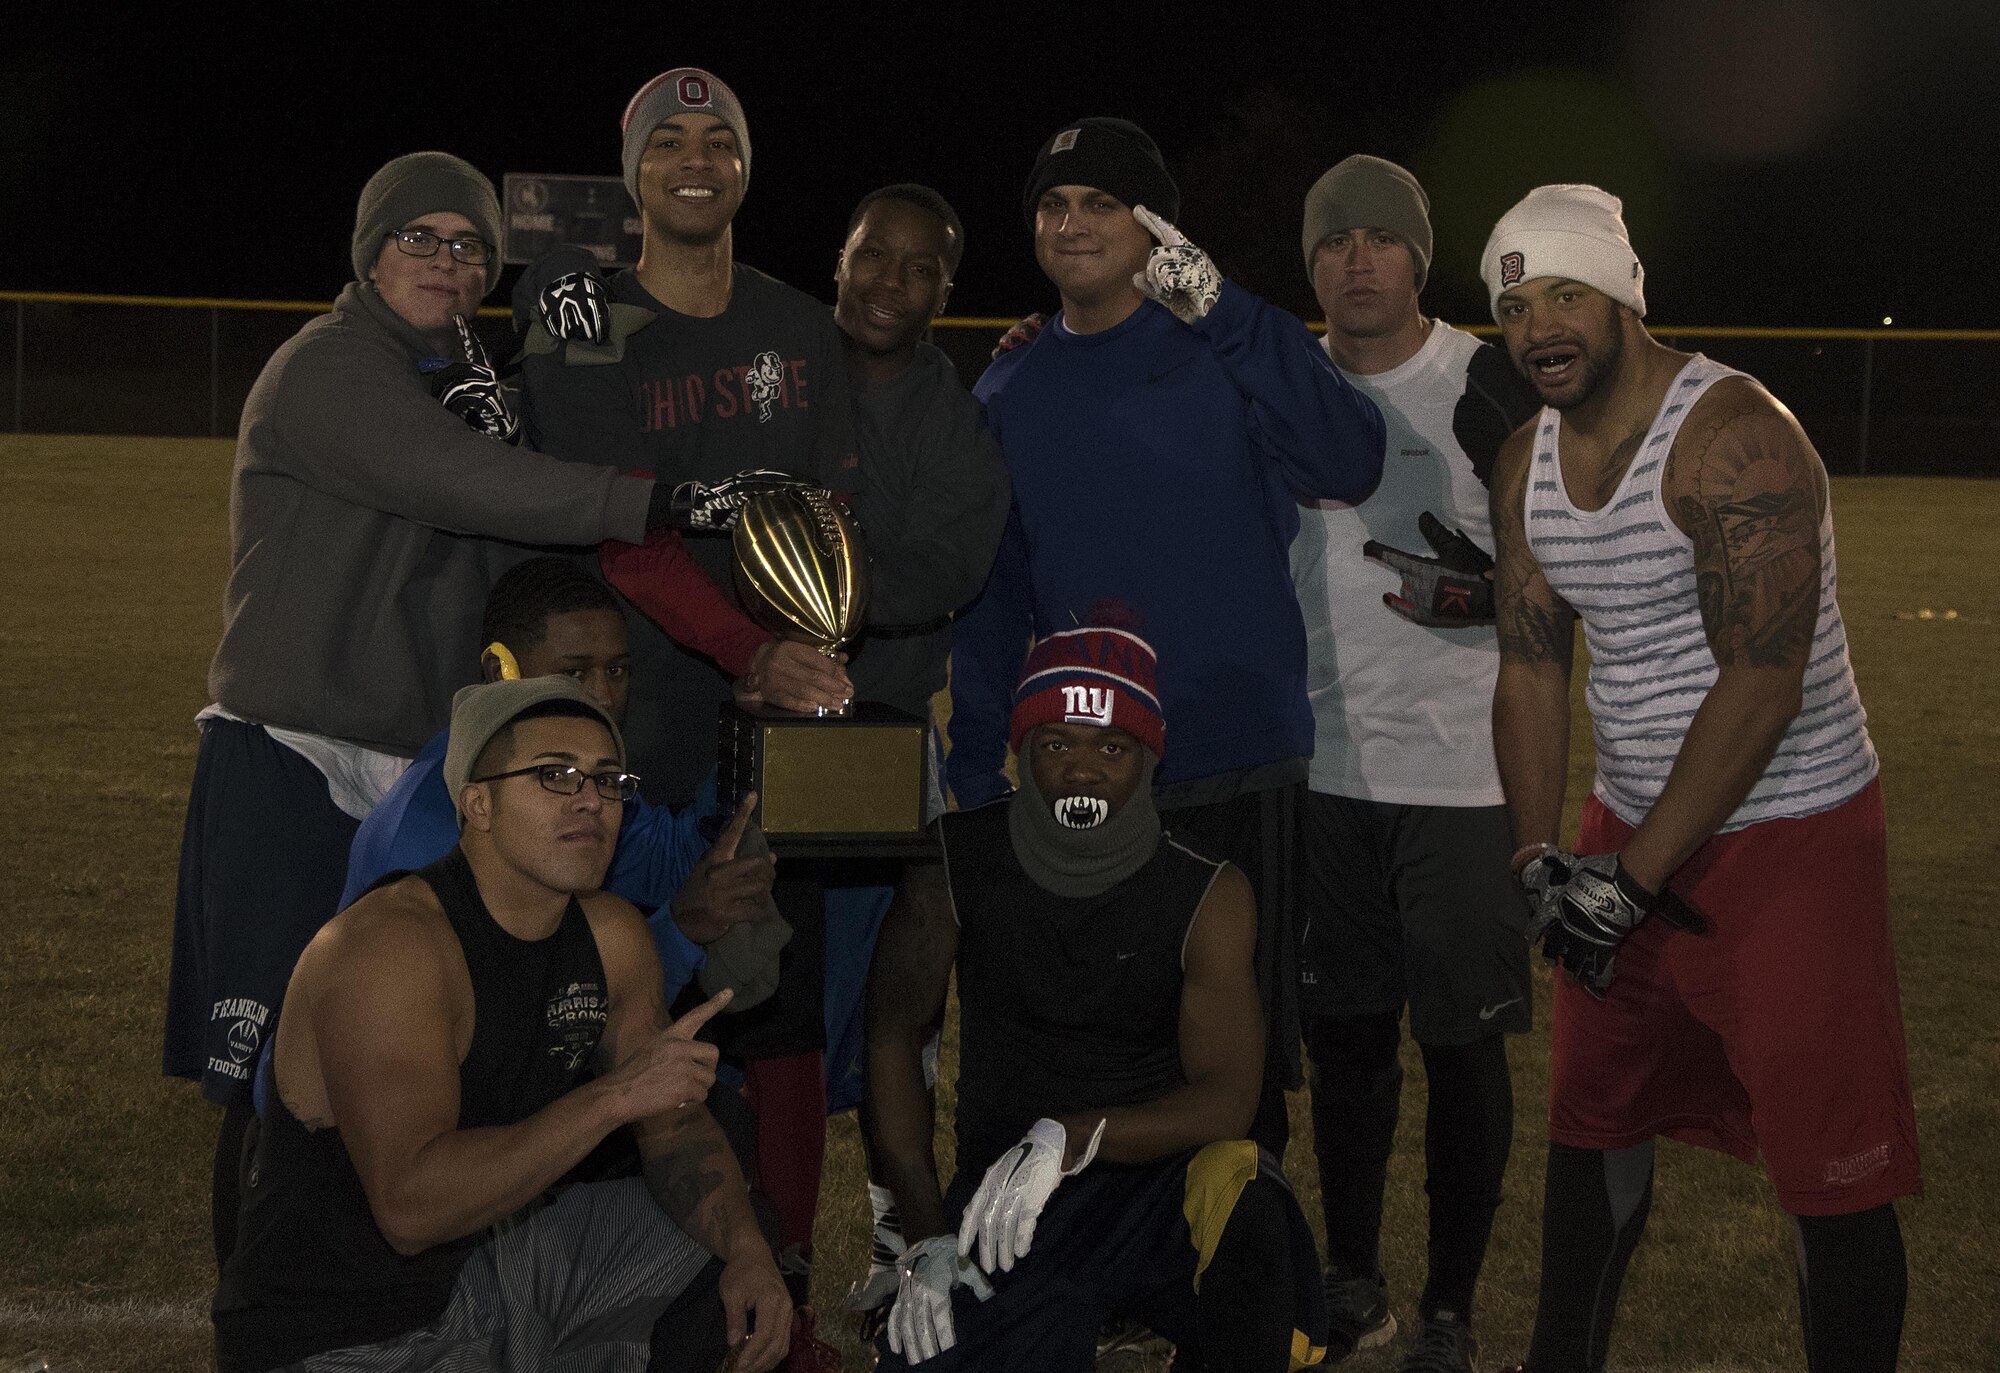 The 90th Maintenance Group and 20th Air Force intramural flag football team pose after winning the championship at F.E. Warren Air Force Base, Wyo., Oct. 19, 2016. The team will keep the trophy until the conclusion of the intramural basketball championship in January. (U.S. Air Force photo by Senior Airman Brandon Valle)